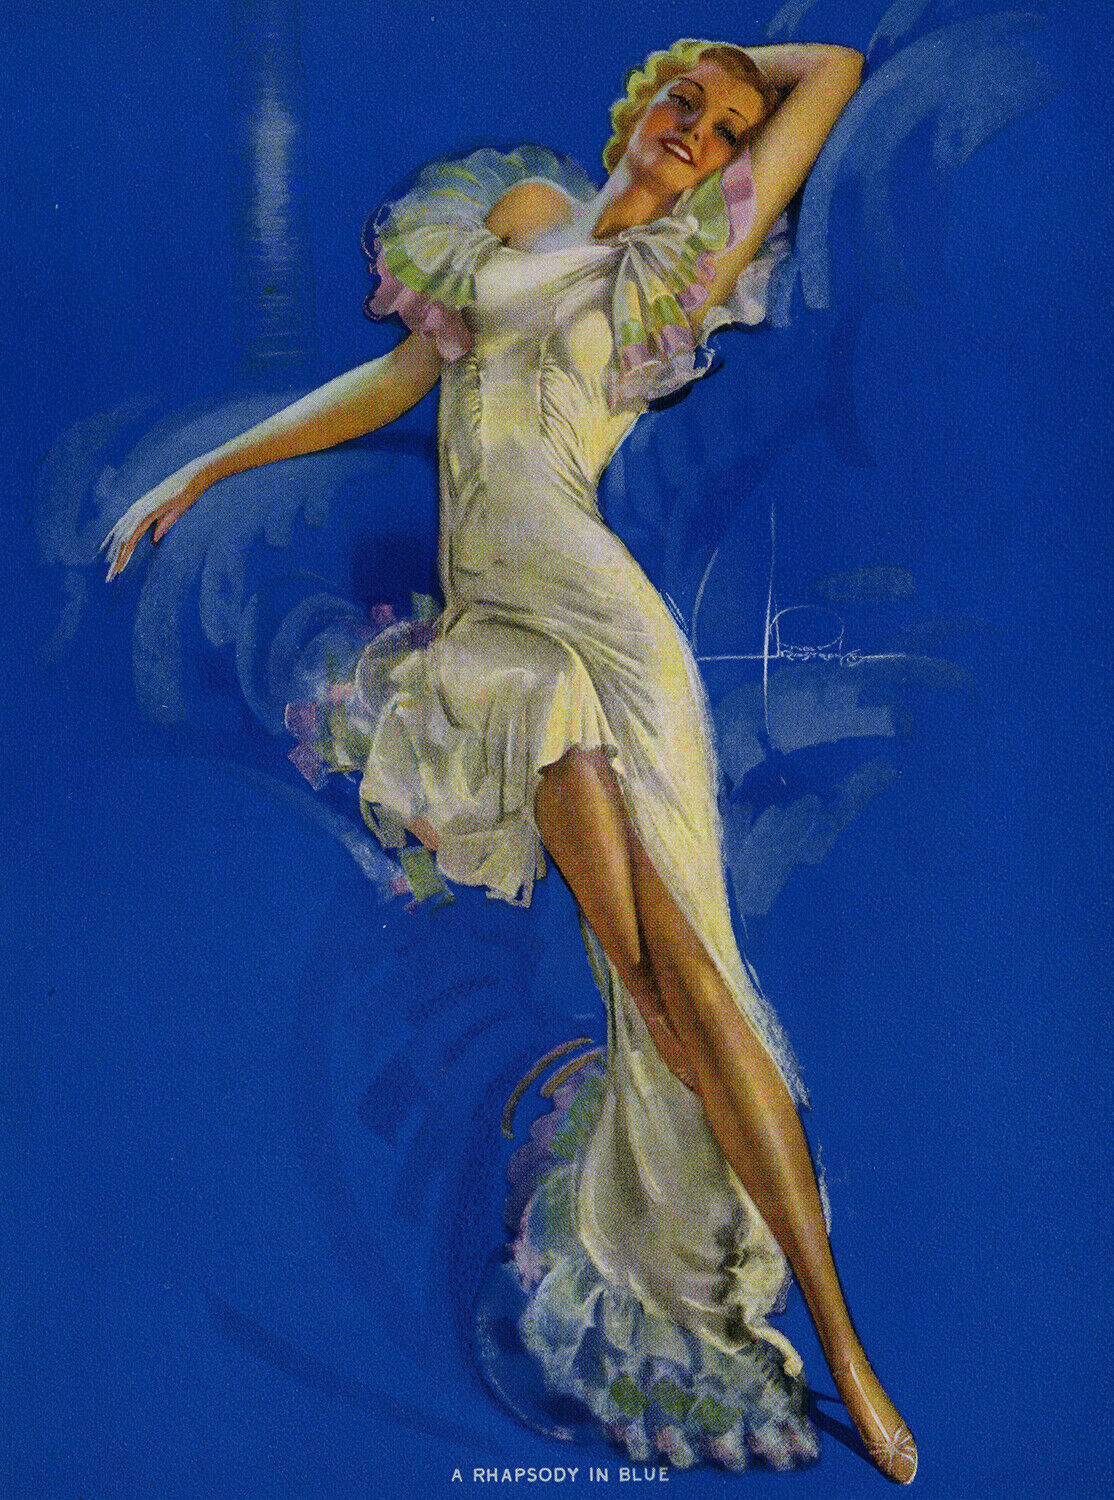 Vintage 1930s Art Deco Pin-Up Print Rolf Armstrong Glamour Rhapsody in Blue Mint